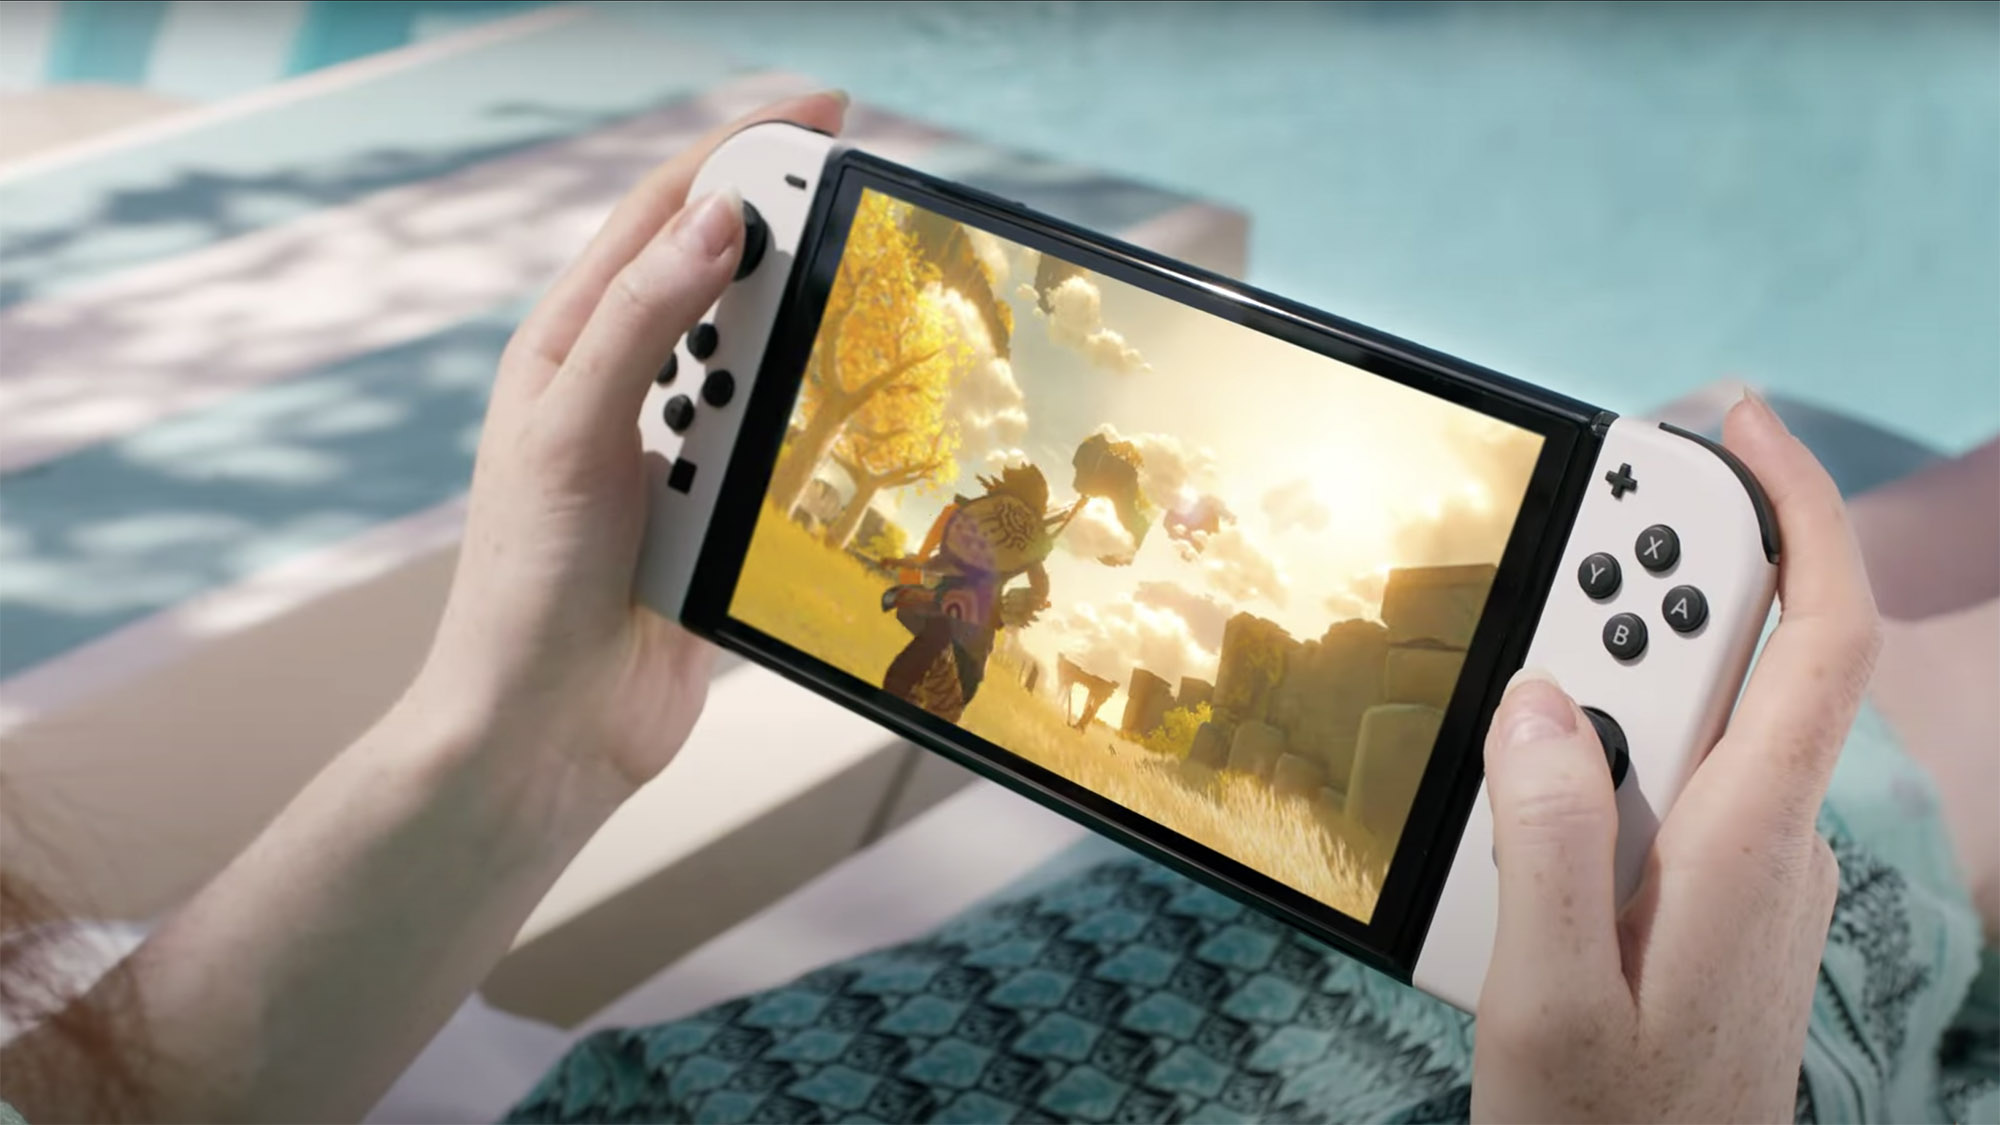 Nintendo Switch games - Rime gets eShop price cut ahead of PS4, Xbox One  release date, Gaming, Entertainment